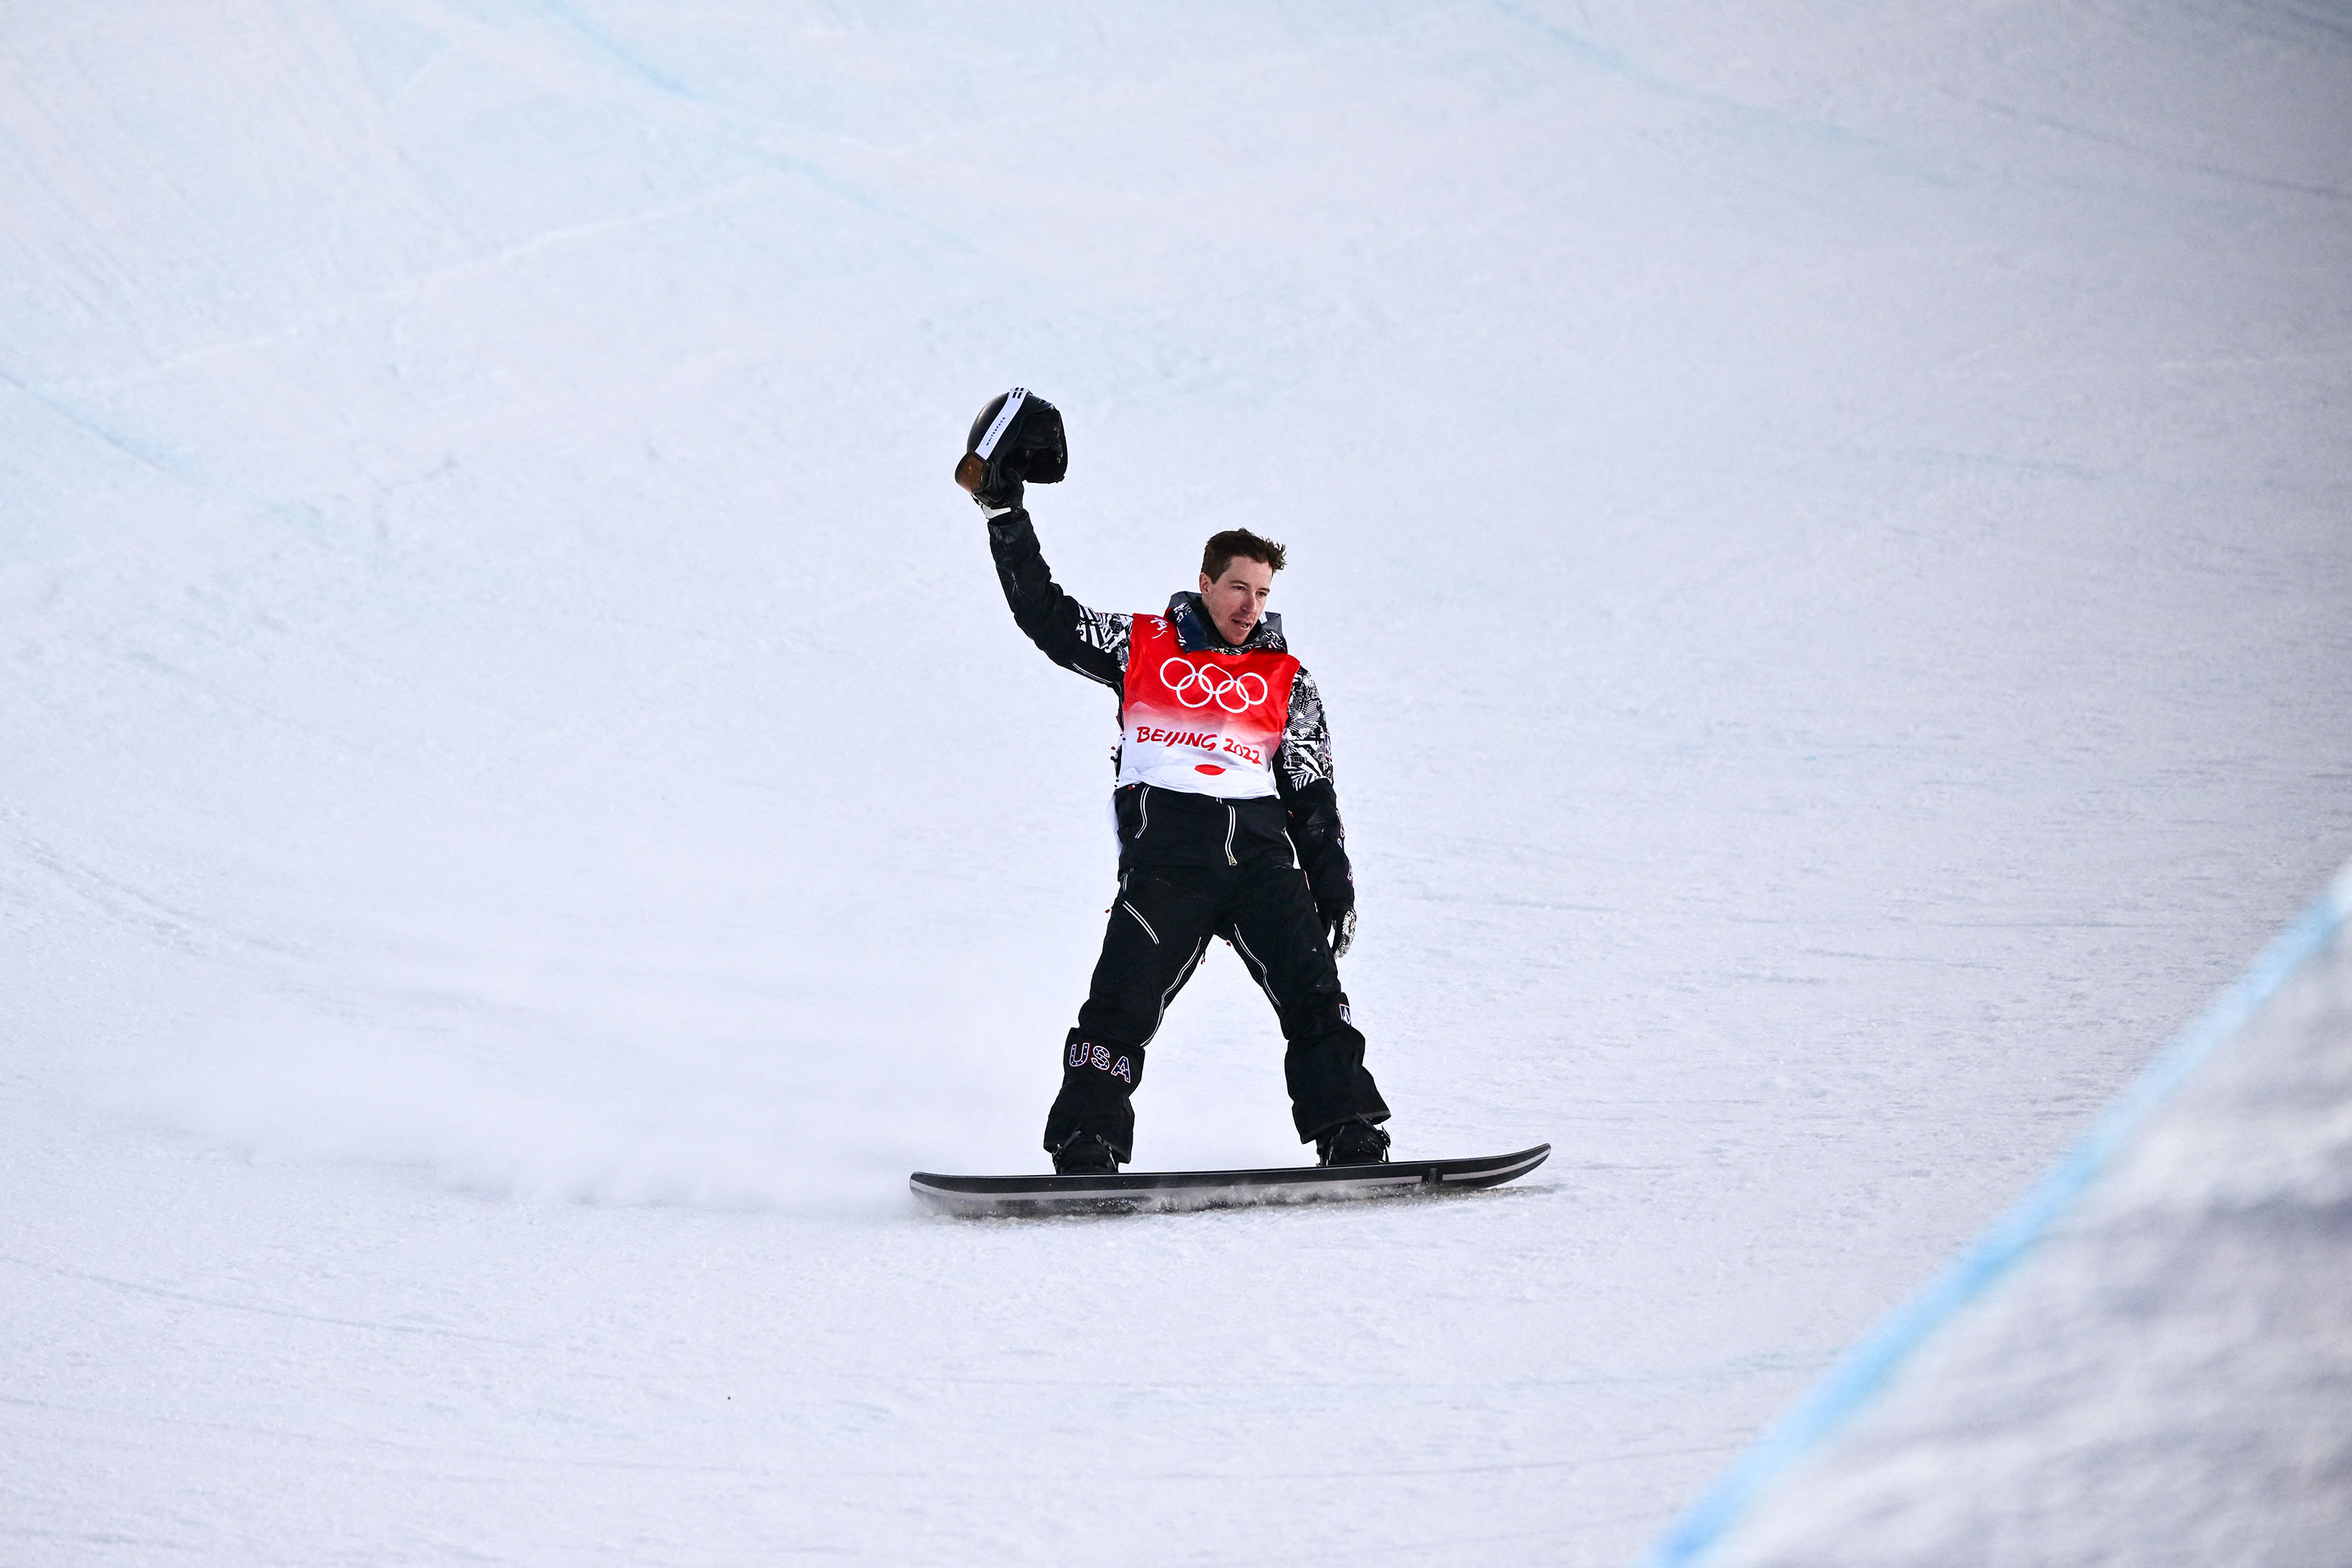 Shaun White finishes fourth in the snowboard men's halfpipe final on Friday.